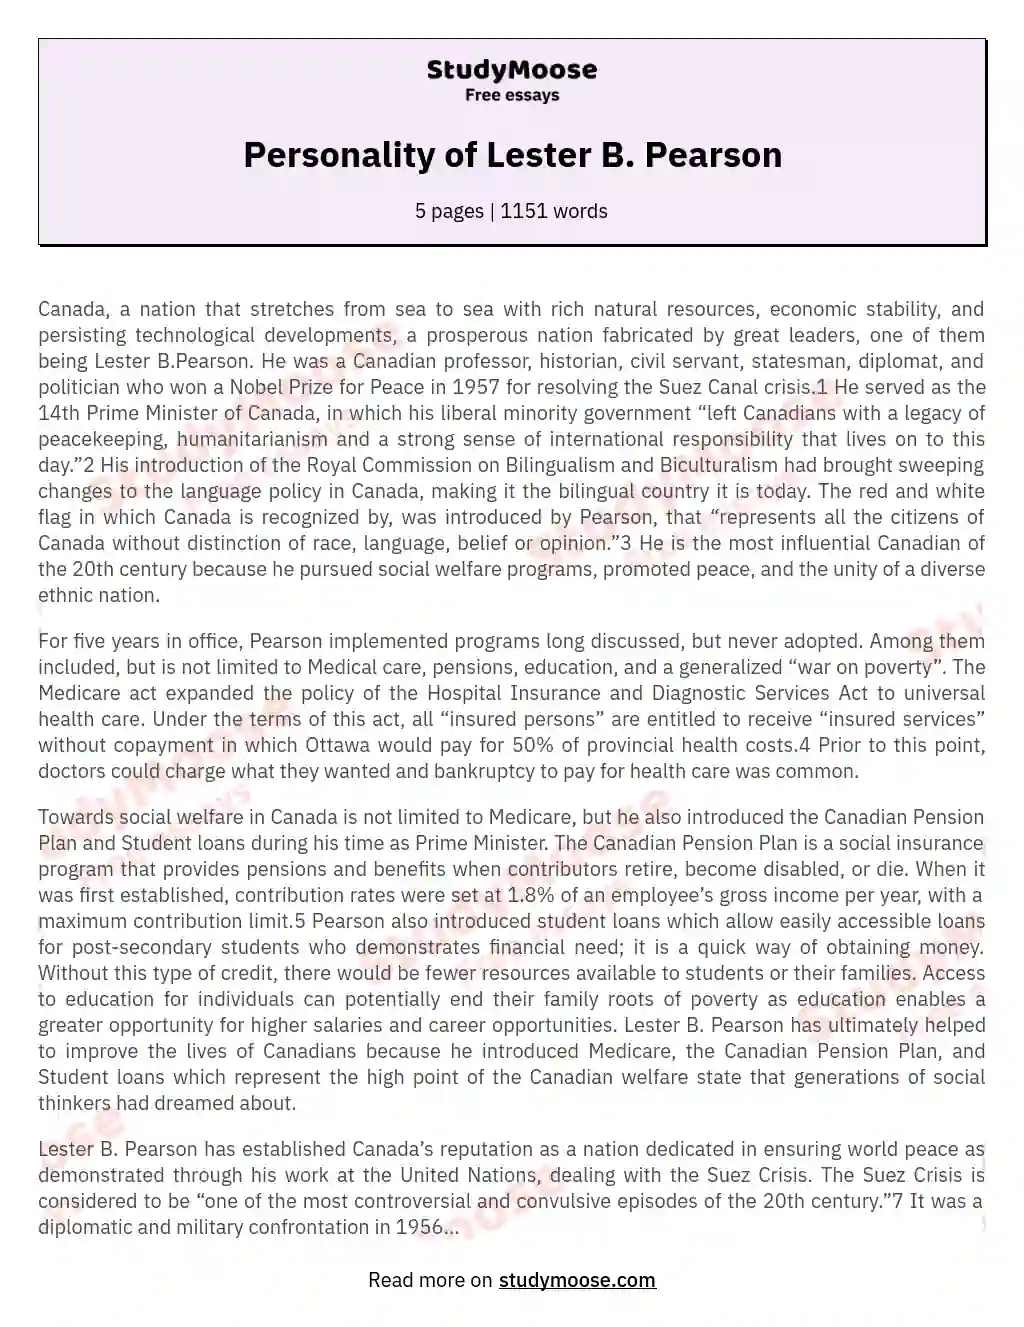 Personality of Lester B. Pearson essay